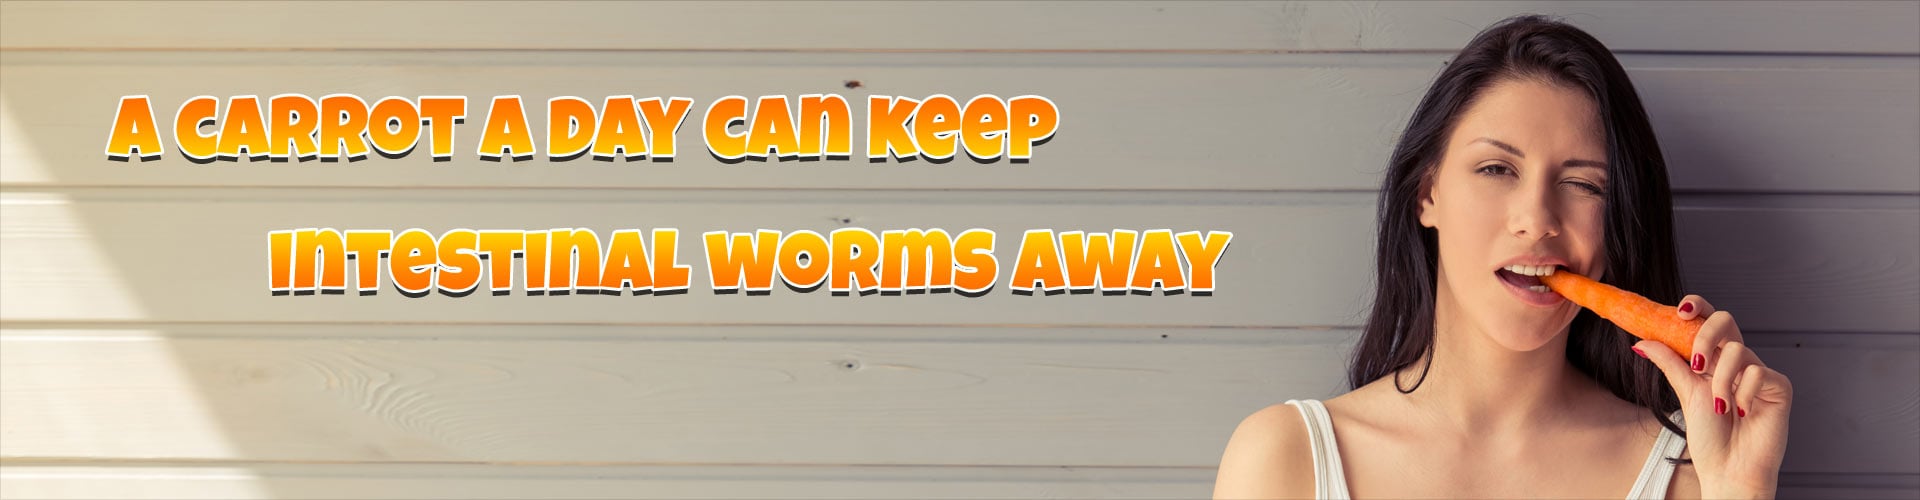 A carrot a day can keep intestinal worms away